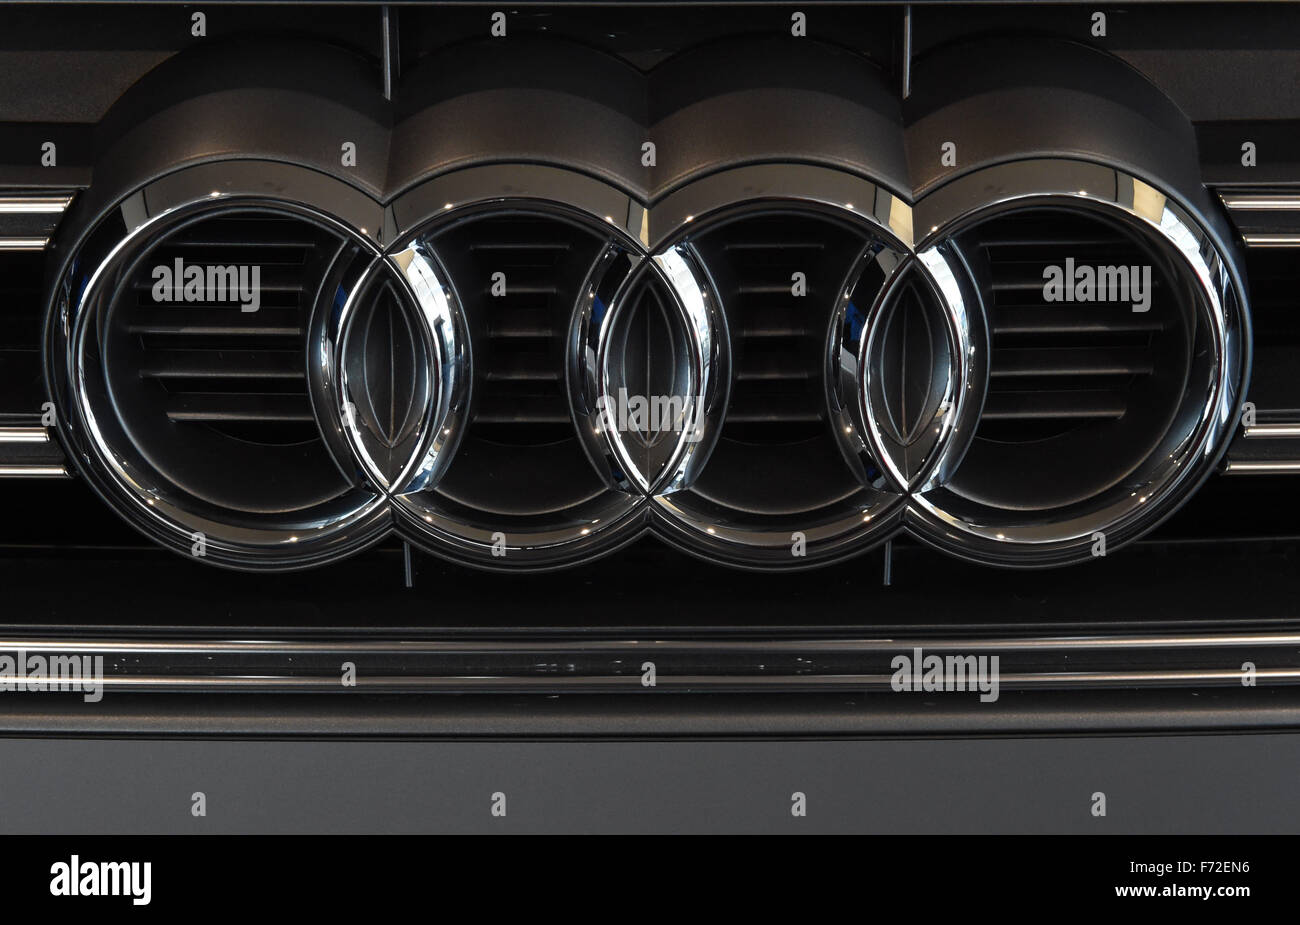 The Audi logo of four interlocking rings on the grille of an Audi S1, at the Audi Forum Munich Airport, Munich, Germany, 8 March 2015. Photo: Felix Hoerhager/dpa - NO WIRE SERVICE - Stock Photo